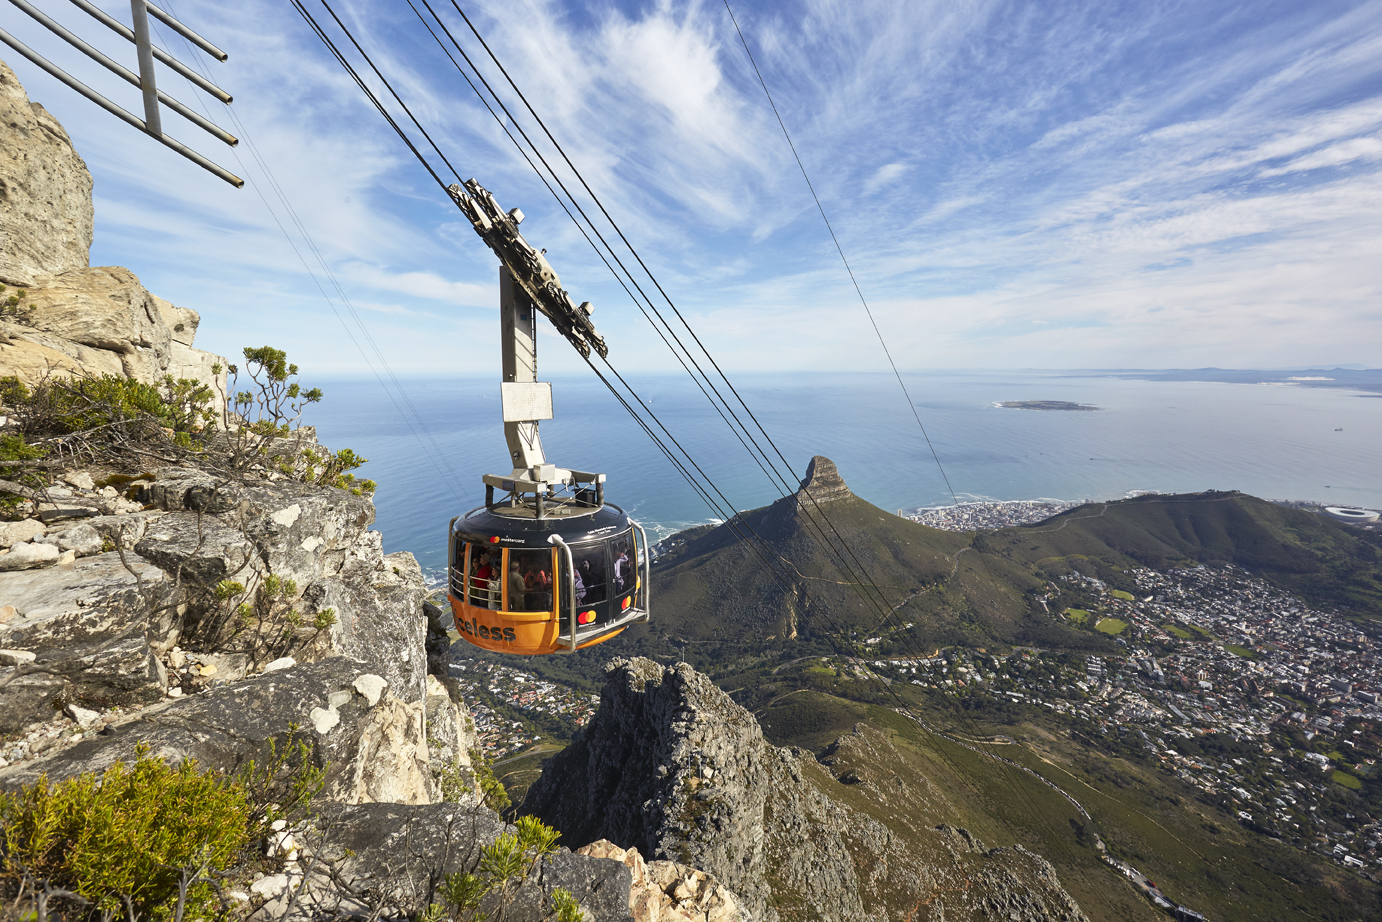 Mountain The history of an iconic landmark, the Table Mountain cableway